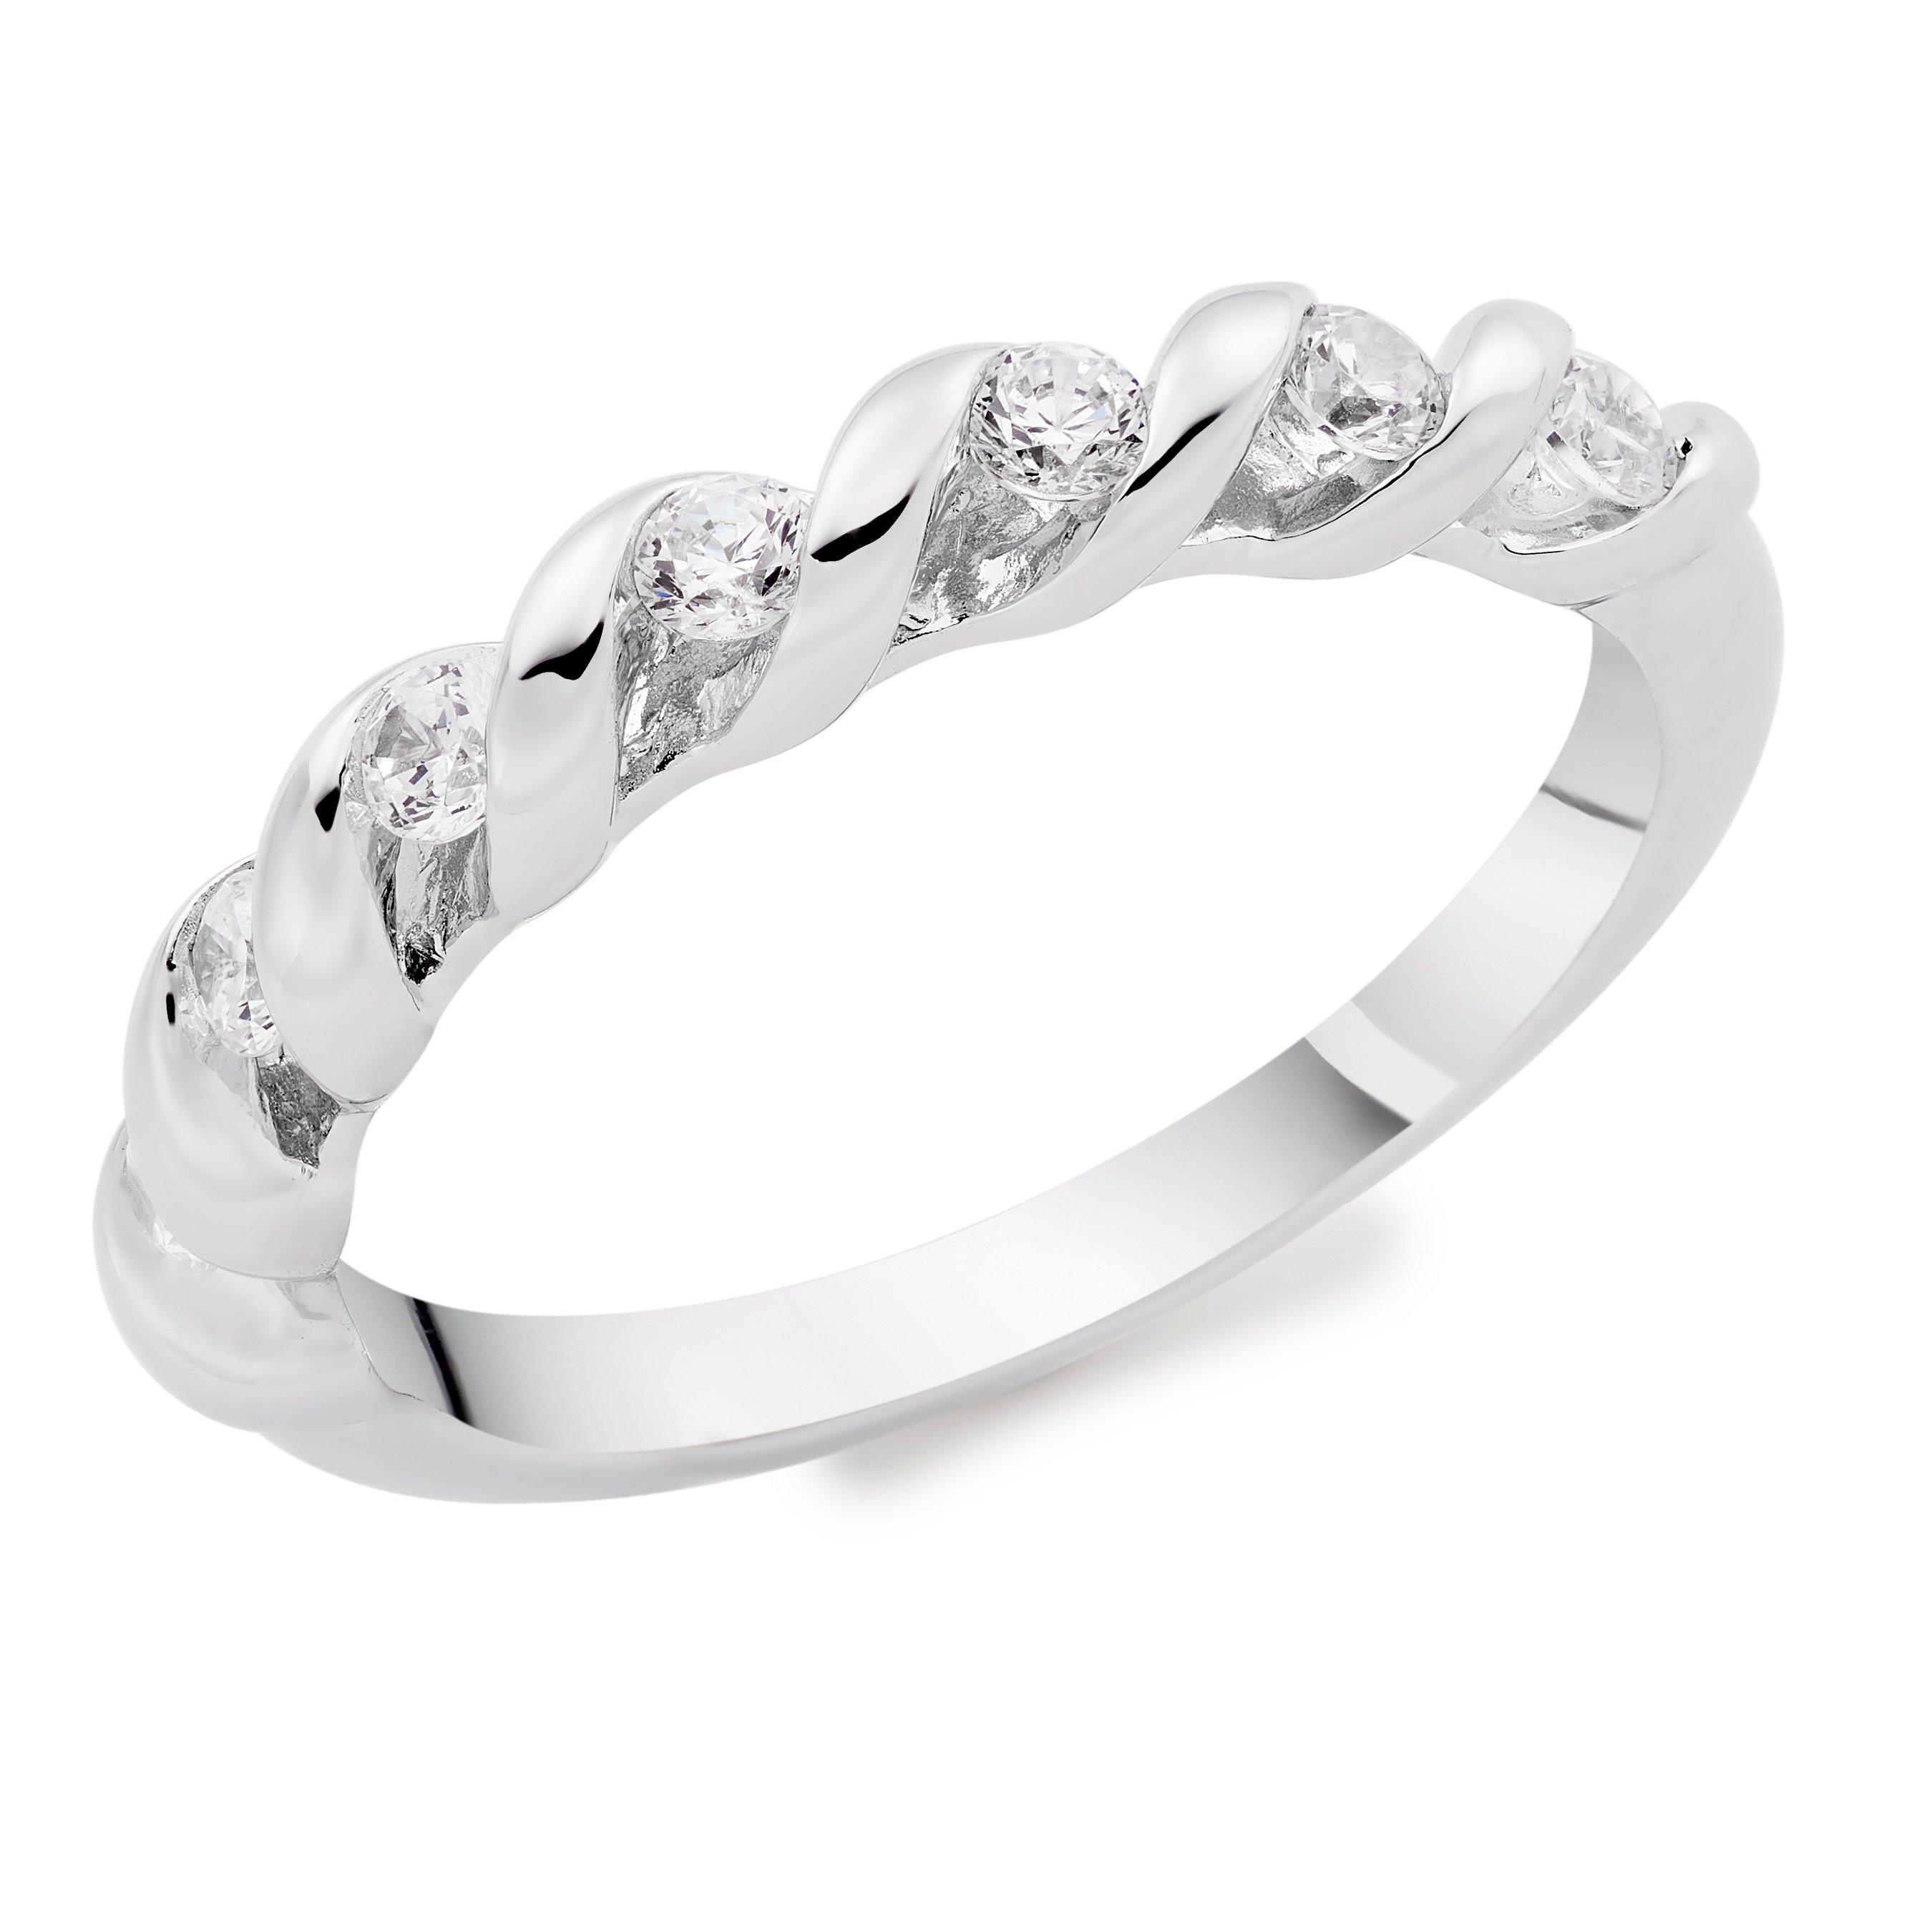 Silver Cubic Zirconia Twist Ring | 0136943 | Beaverbrooks the Jewellers